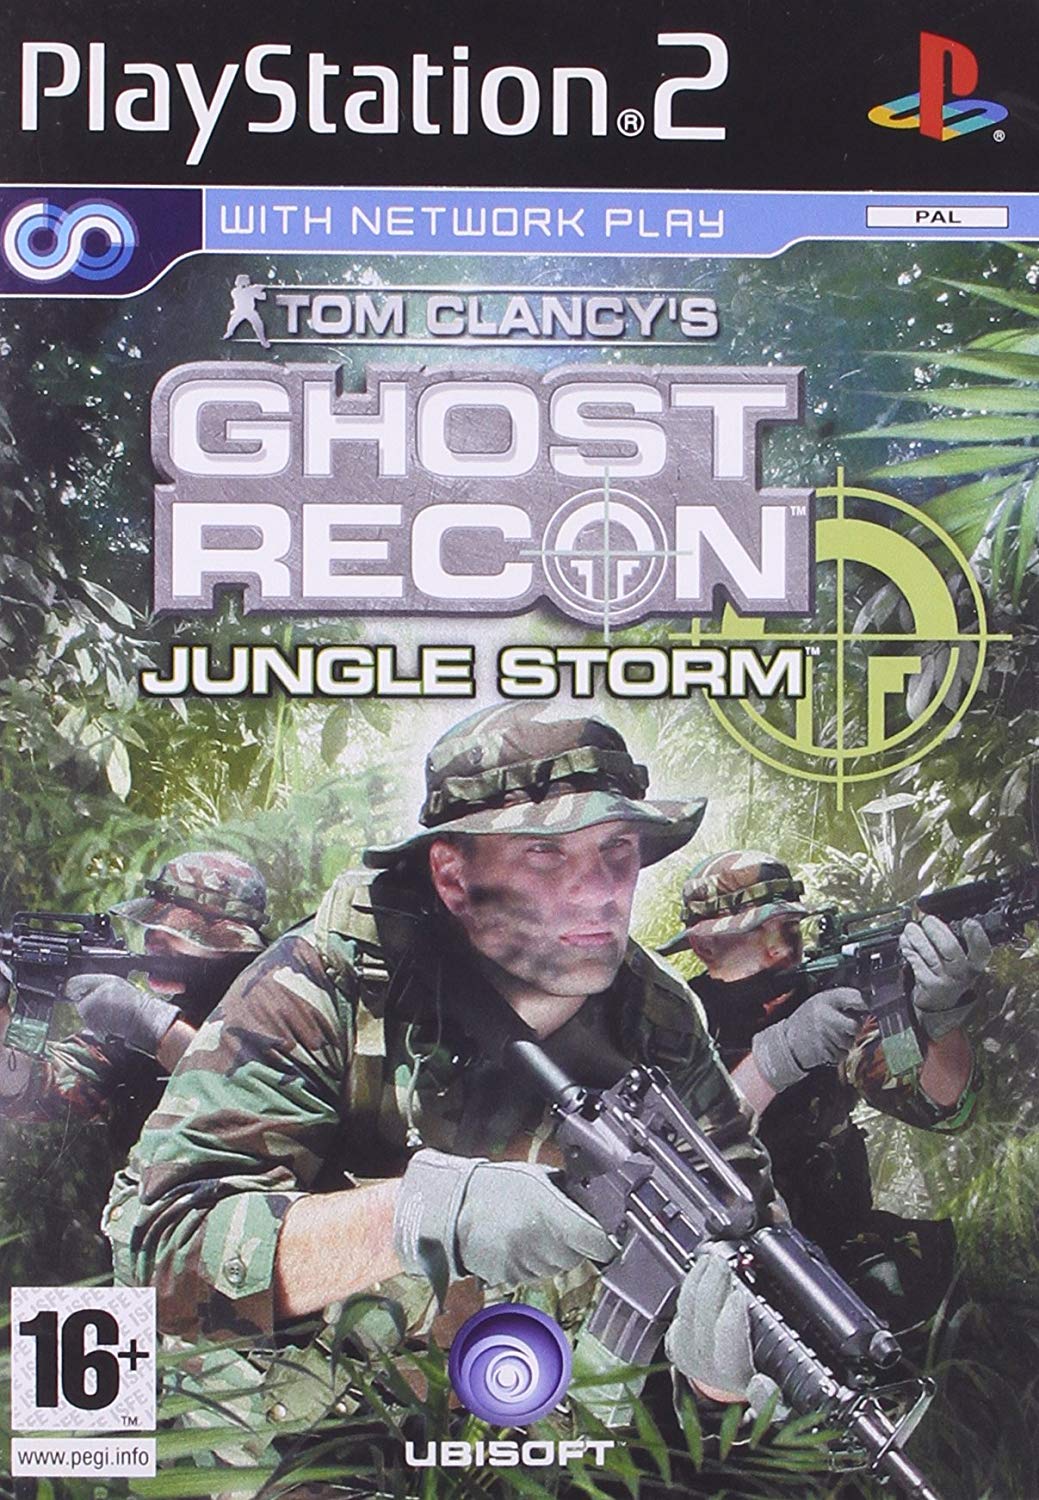 Tom Clancys Ghost Recon Jungle Storm